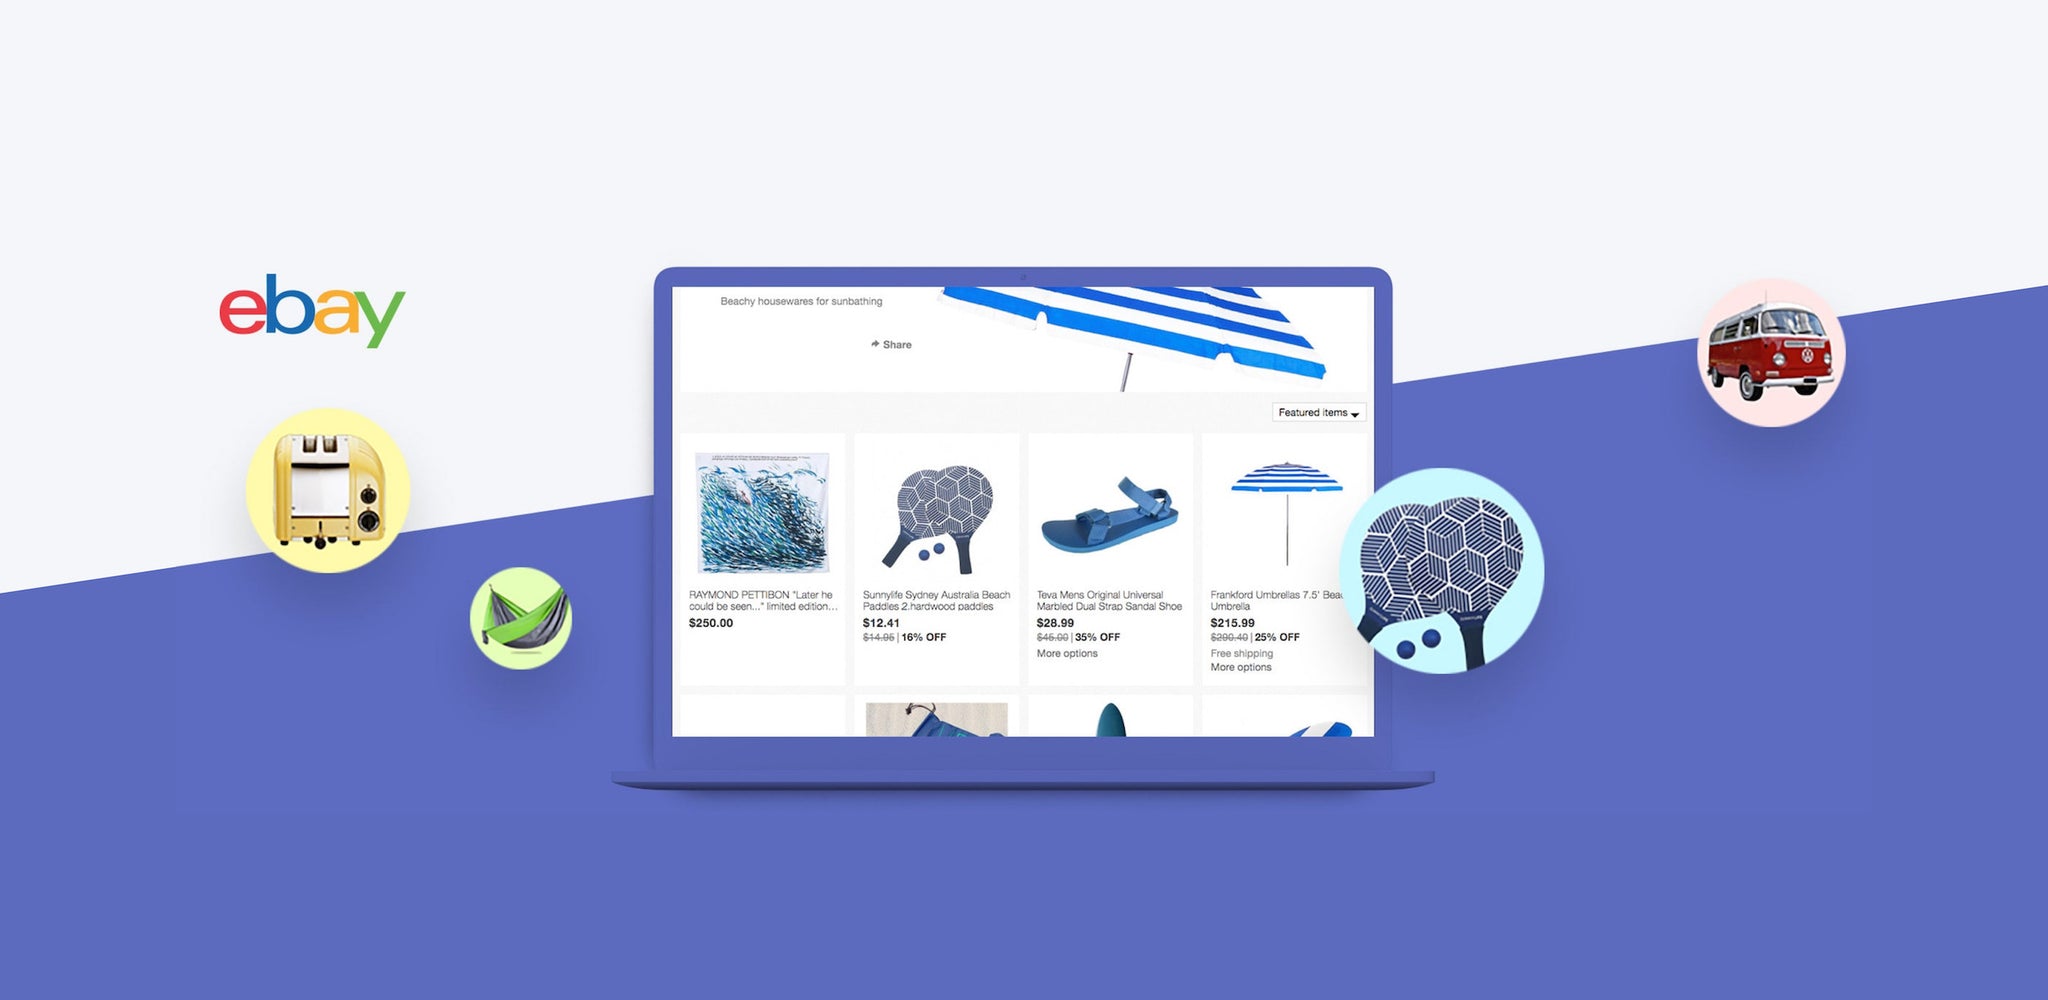 Shopify’s new eBay Sales Channel and how it affects your business